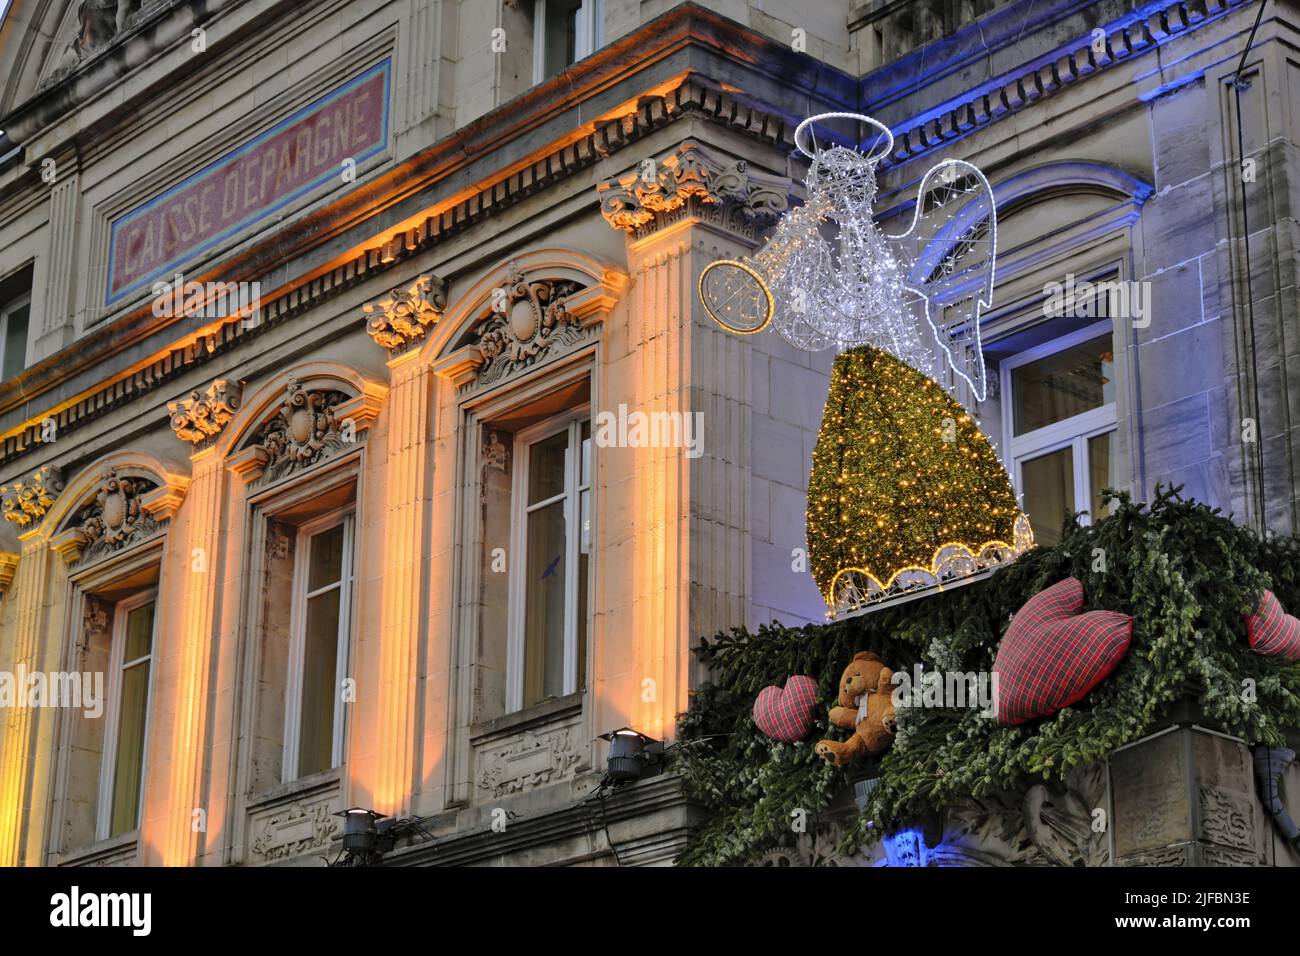 France, Doubs, Montbeliard, Place Saint Martin, Caisse d Epargne built in 1900, Christmas decorations and illuminations Stock Photo